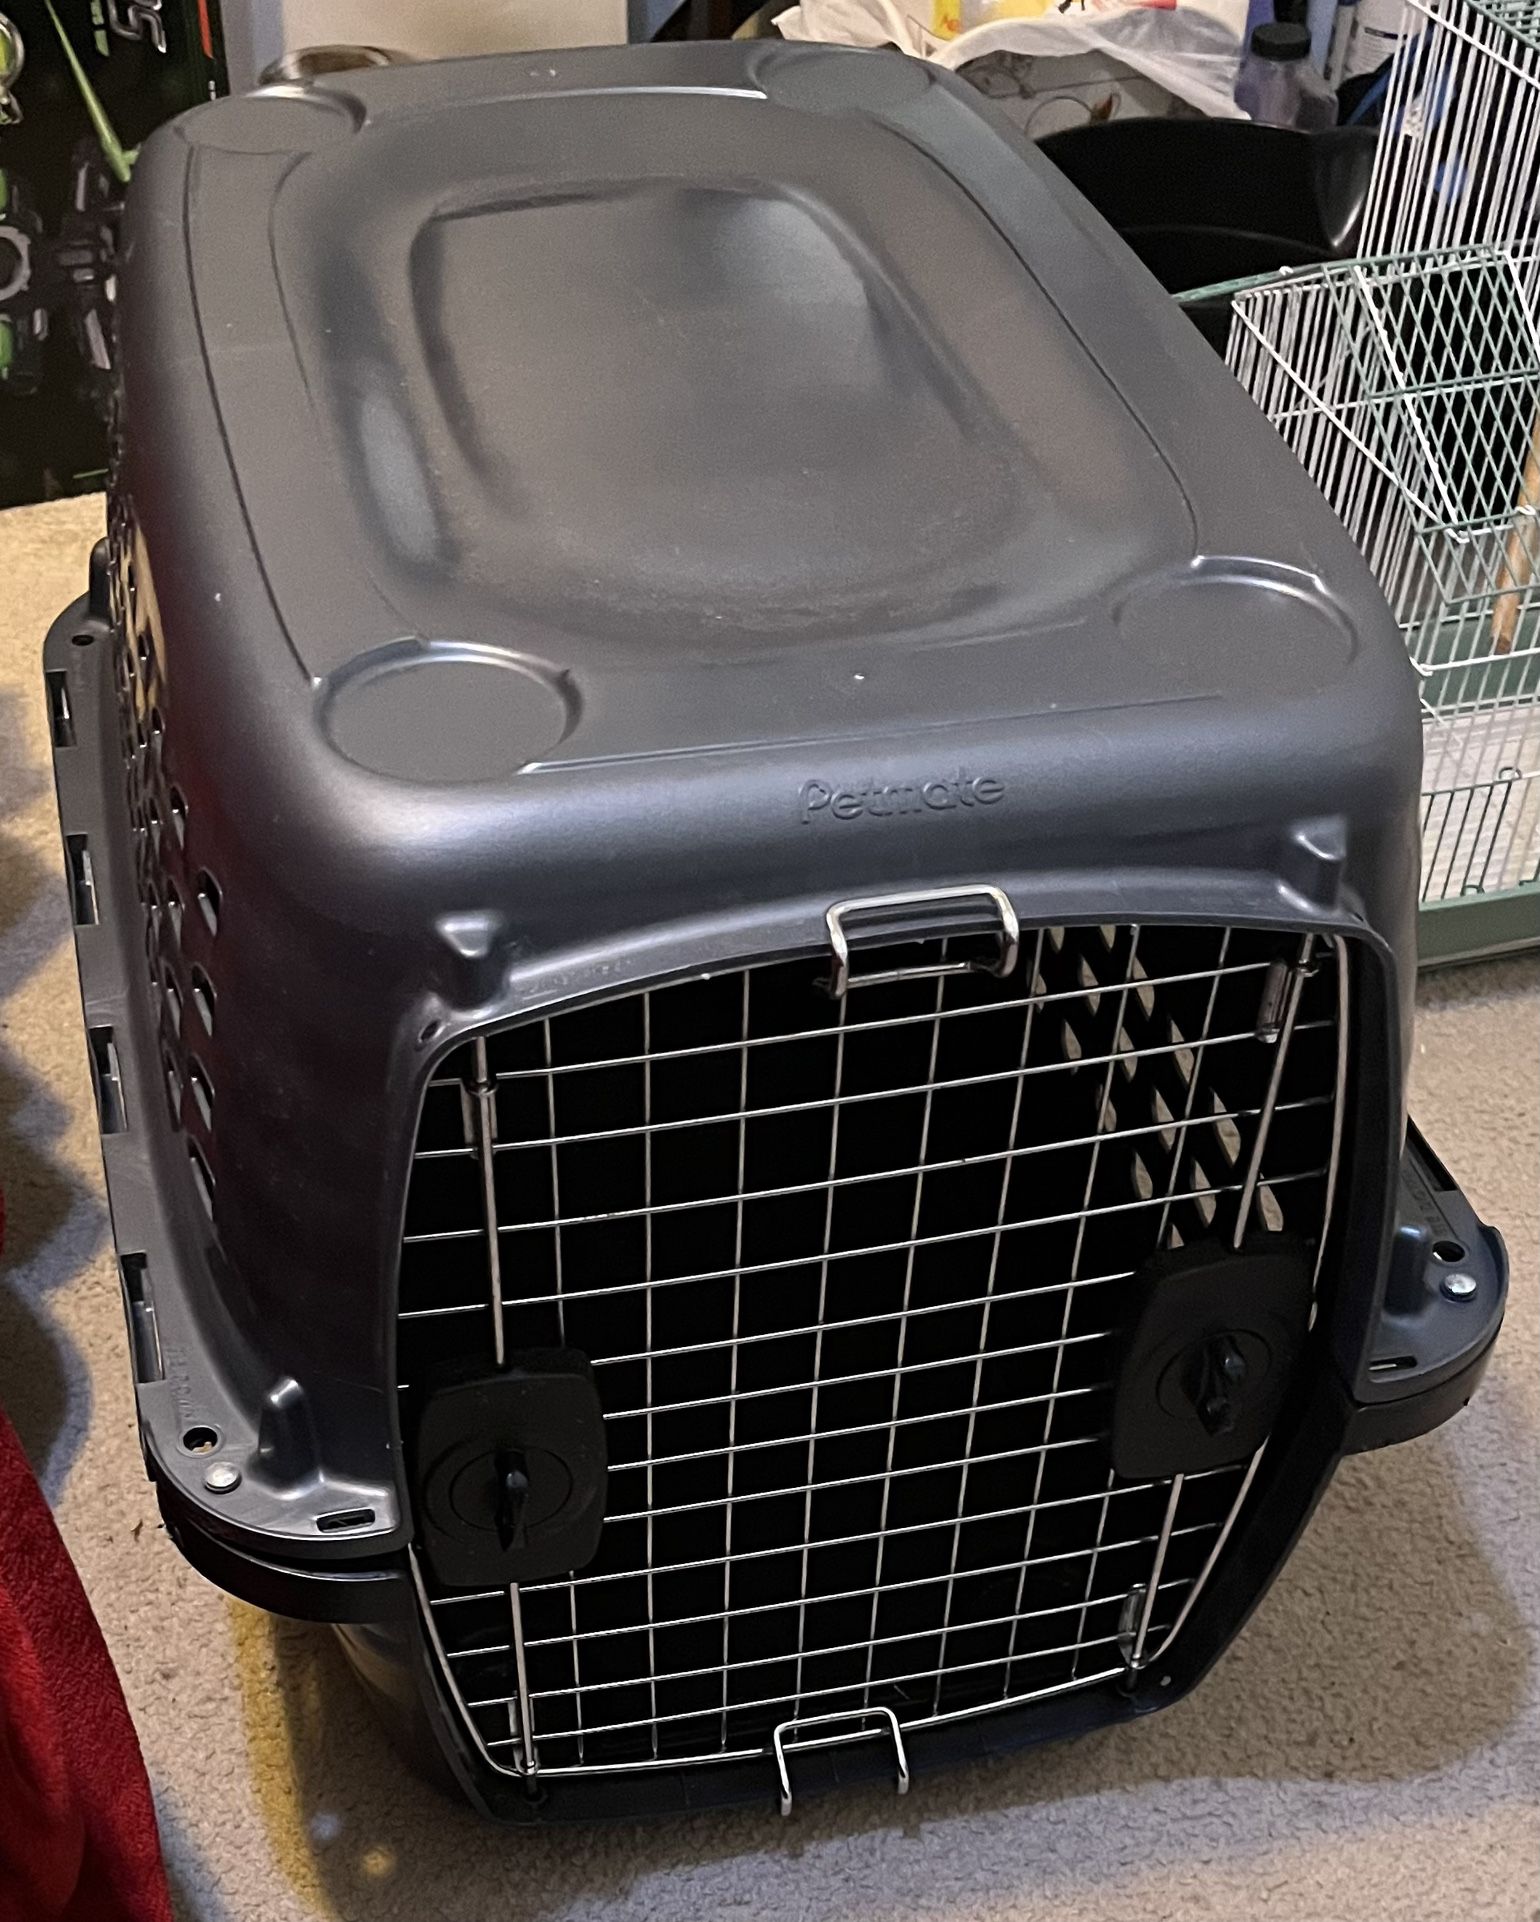 Pet mate Small Kennel For Dogs Or Cats 